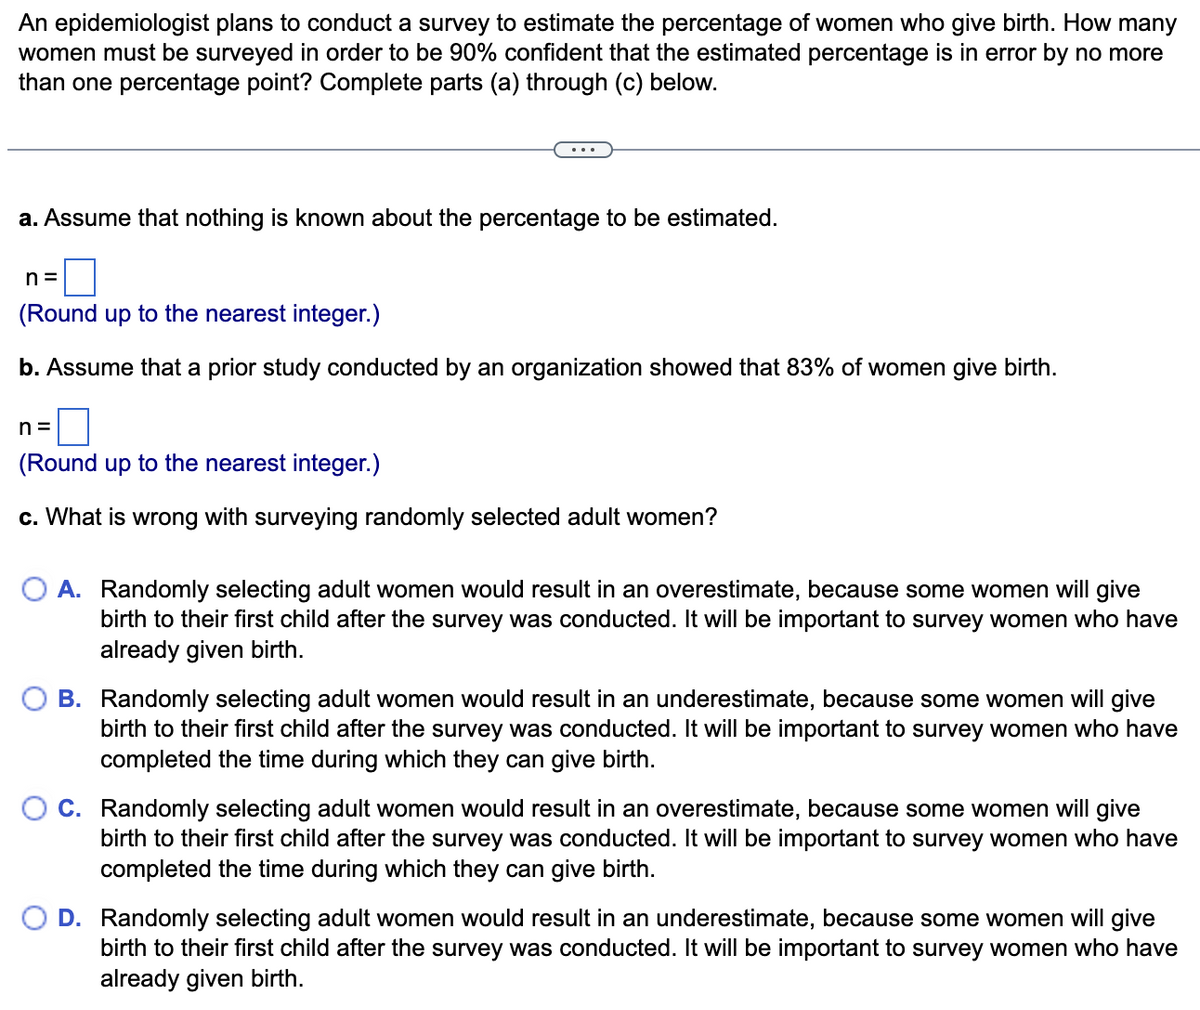 An epidemiologist plans to conduct a survey to estimate the percentage of women who give birth. How many
women must be surveyed in order to be 90% confident that the estimated percentage is in error by no more
than one percentage point? Complete parts (a) through (c) below.
a. Assume that nothing is known about the percentage to be estimated.
n=
(Round up to the nearest integer.)
b. Assume that a prior study conducted by an organization showed that 83% of women give birth.
n=
(Round up to the nearest integer.)
c. What is wrong with surveying randomly selected adult women?
O A. Randomly selecting adult women would result in an overestimate, because some women will give
birth to their first child after the survey was conducted. It will be important to survey women who have
already given birth.
B. Randomly selecting adult women would result in an underestimate, because some women will give
birth to their first child after the survey was conducted. It will be important to survey women who have
completed the time during which they can give birth.
C. Randomly selecting adult women would result in an overestimate, because some women will give
birth to their first child after the survey was conducted. It will be important to survey women who have
completed the time during which they can give birth.
D. Randomly selecting adult women would result in an underestimate, because some women will give
birth to their first child after the survey was conducted. It will be important to survey women who have
already given birth.